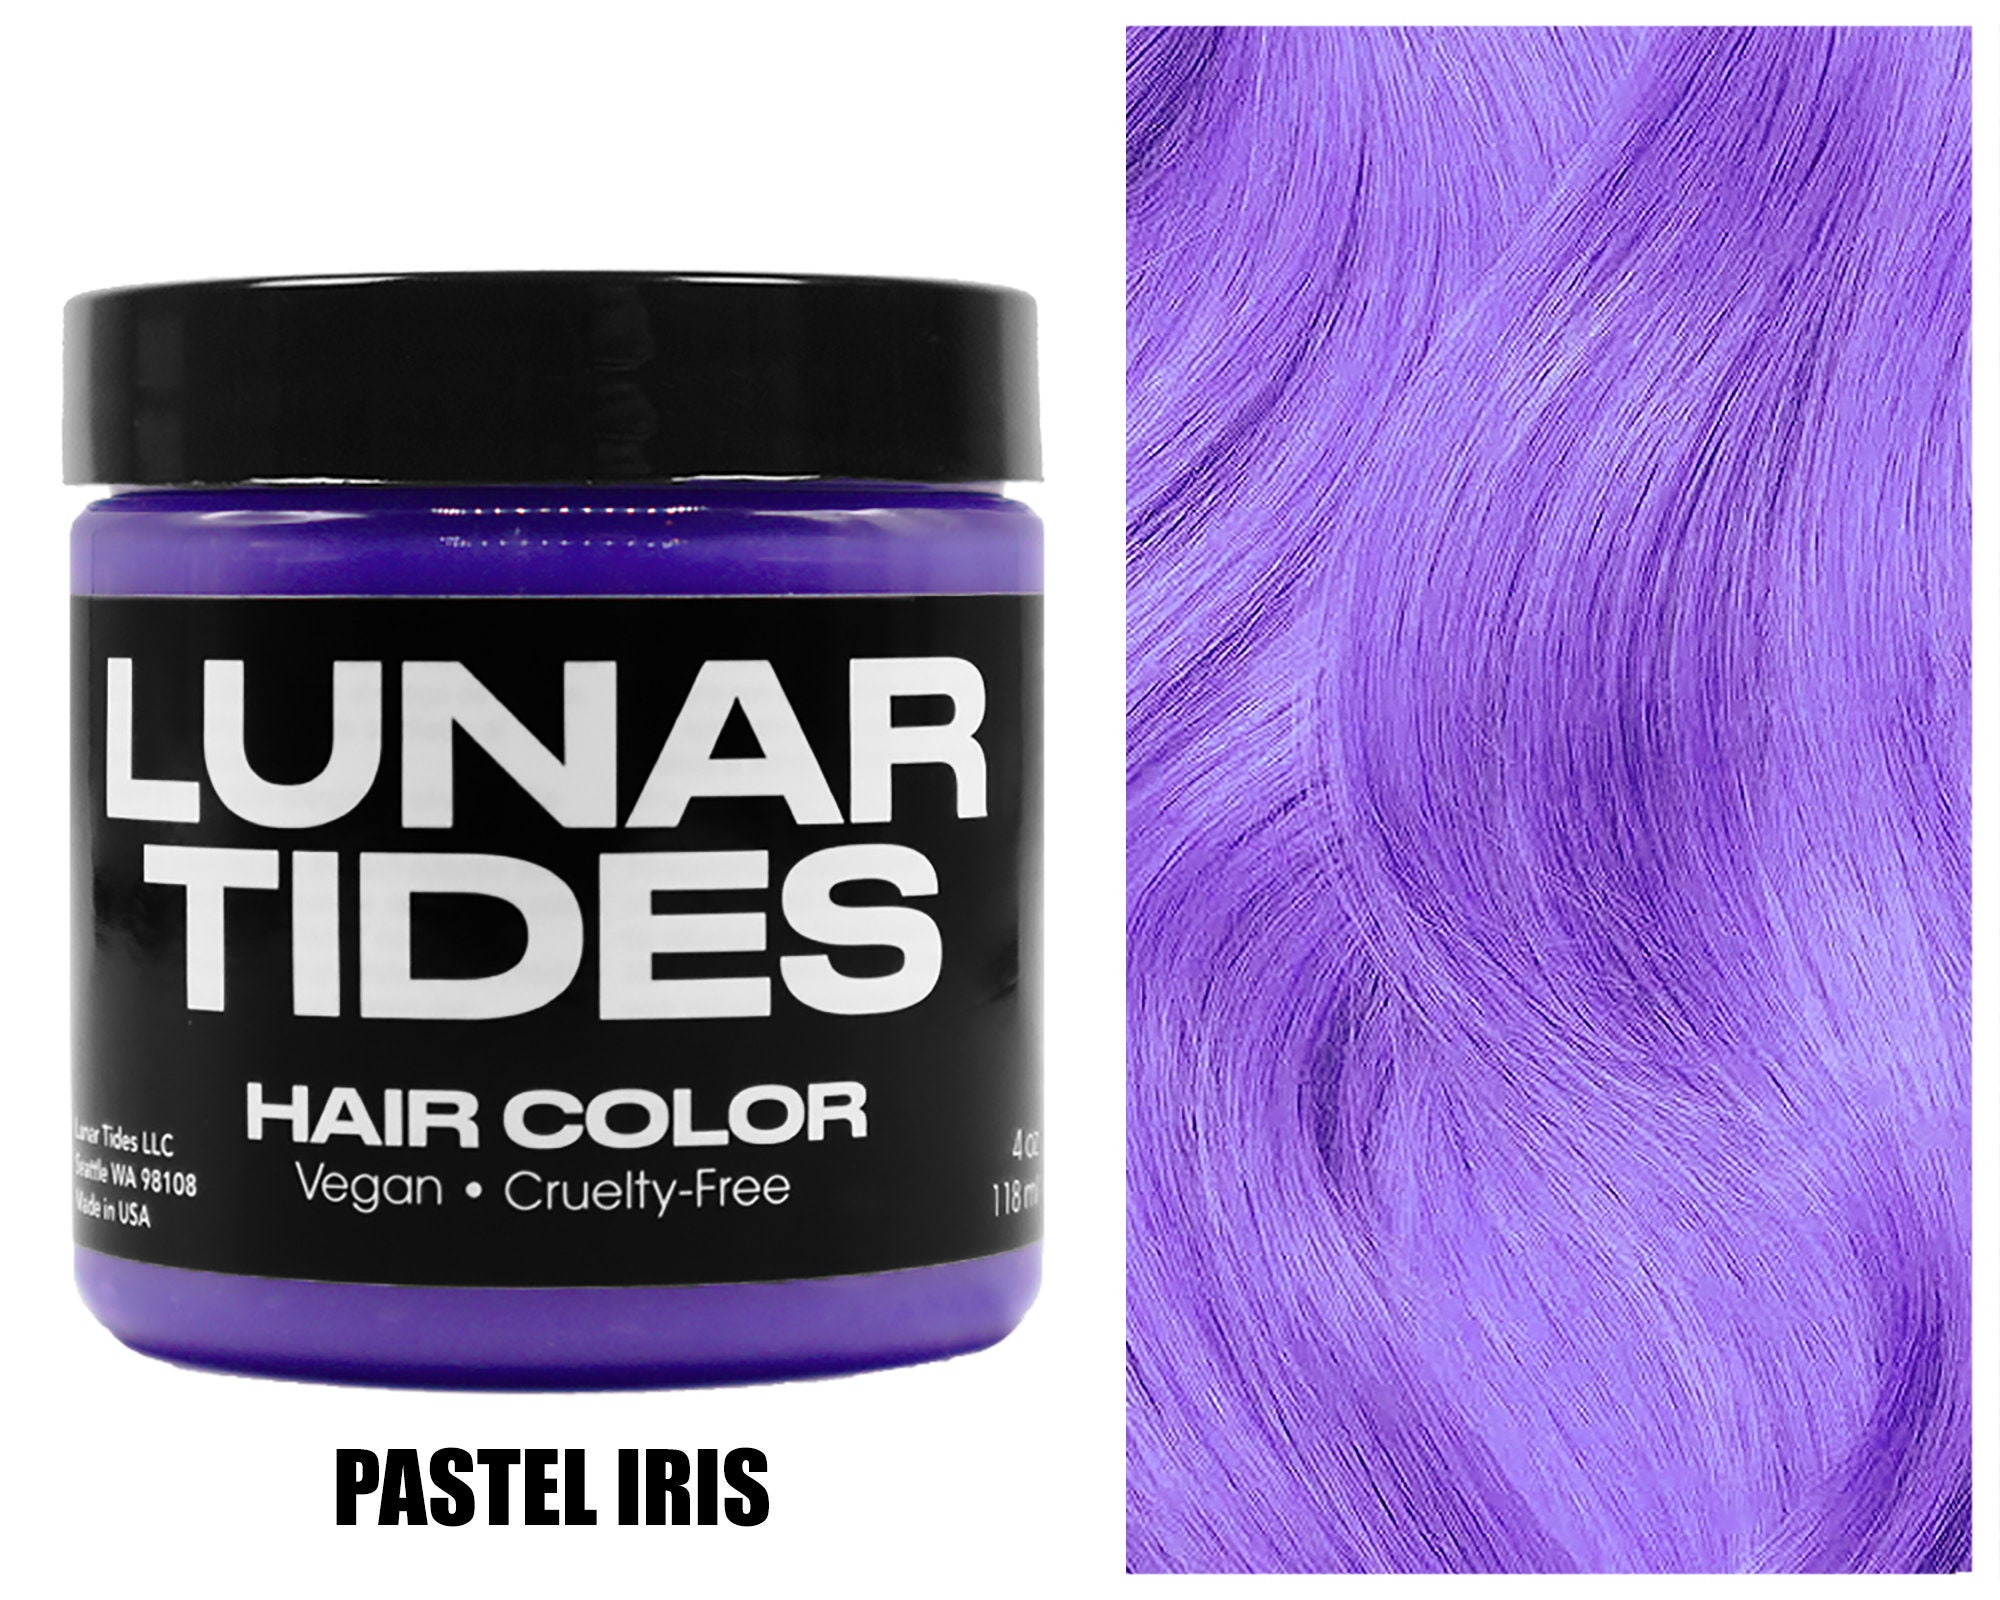 Smoky lilac is the most subtle cool hair color yet   HelloGigglesHelloGiggles